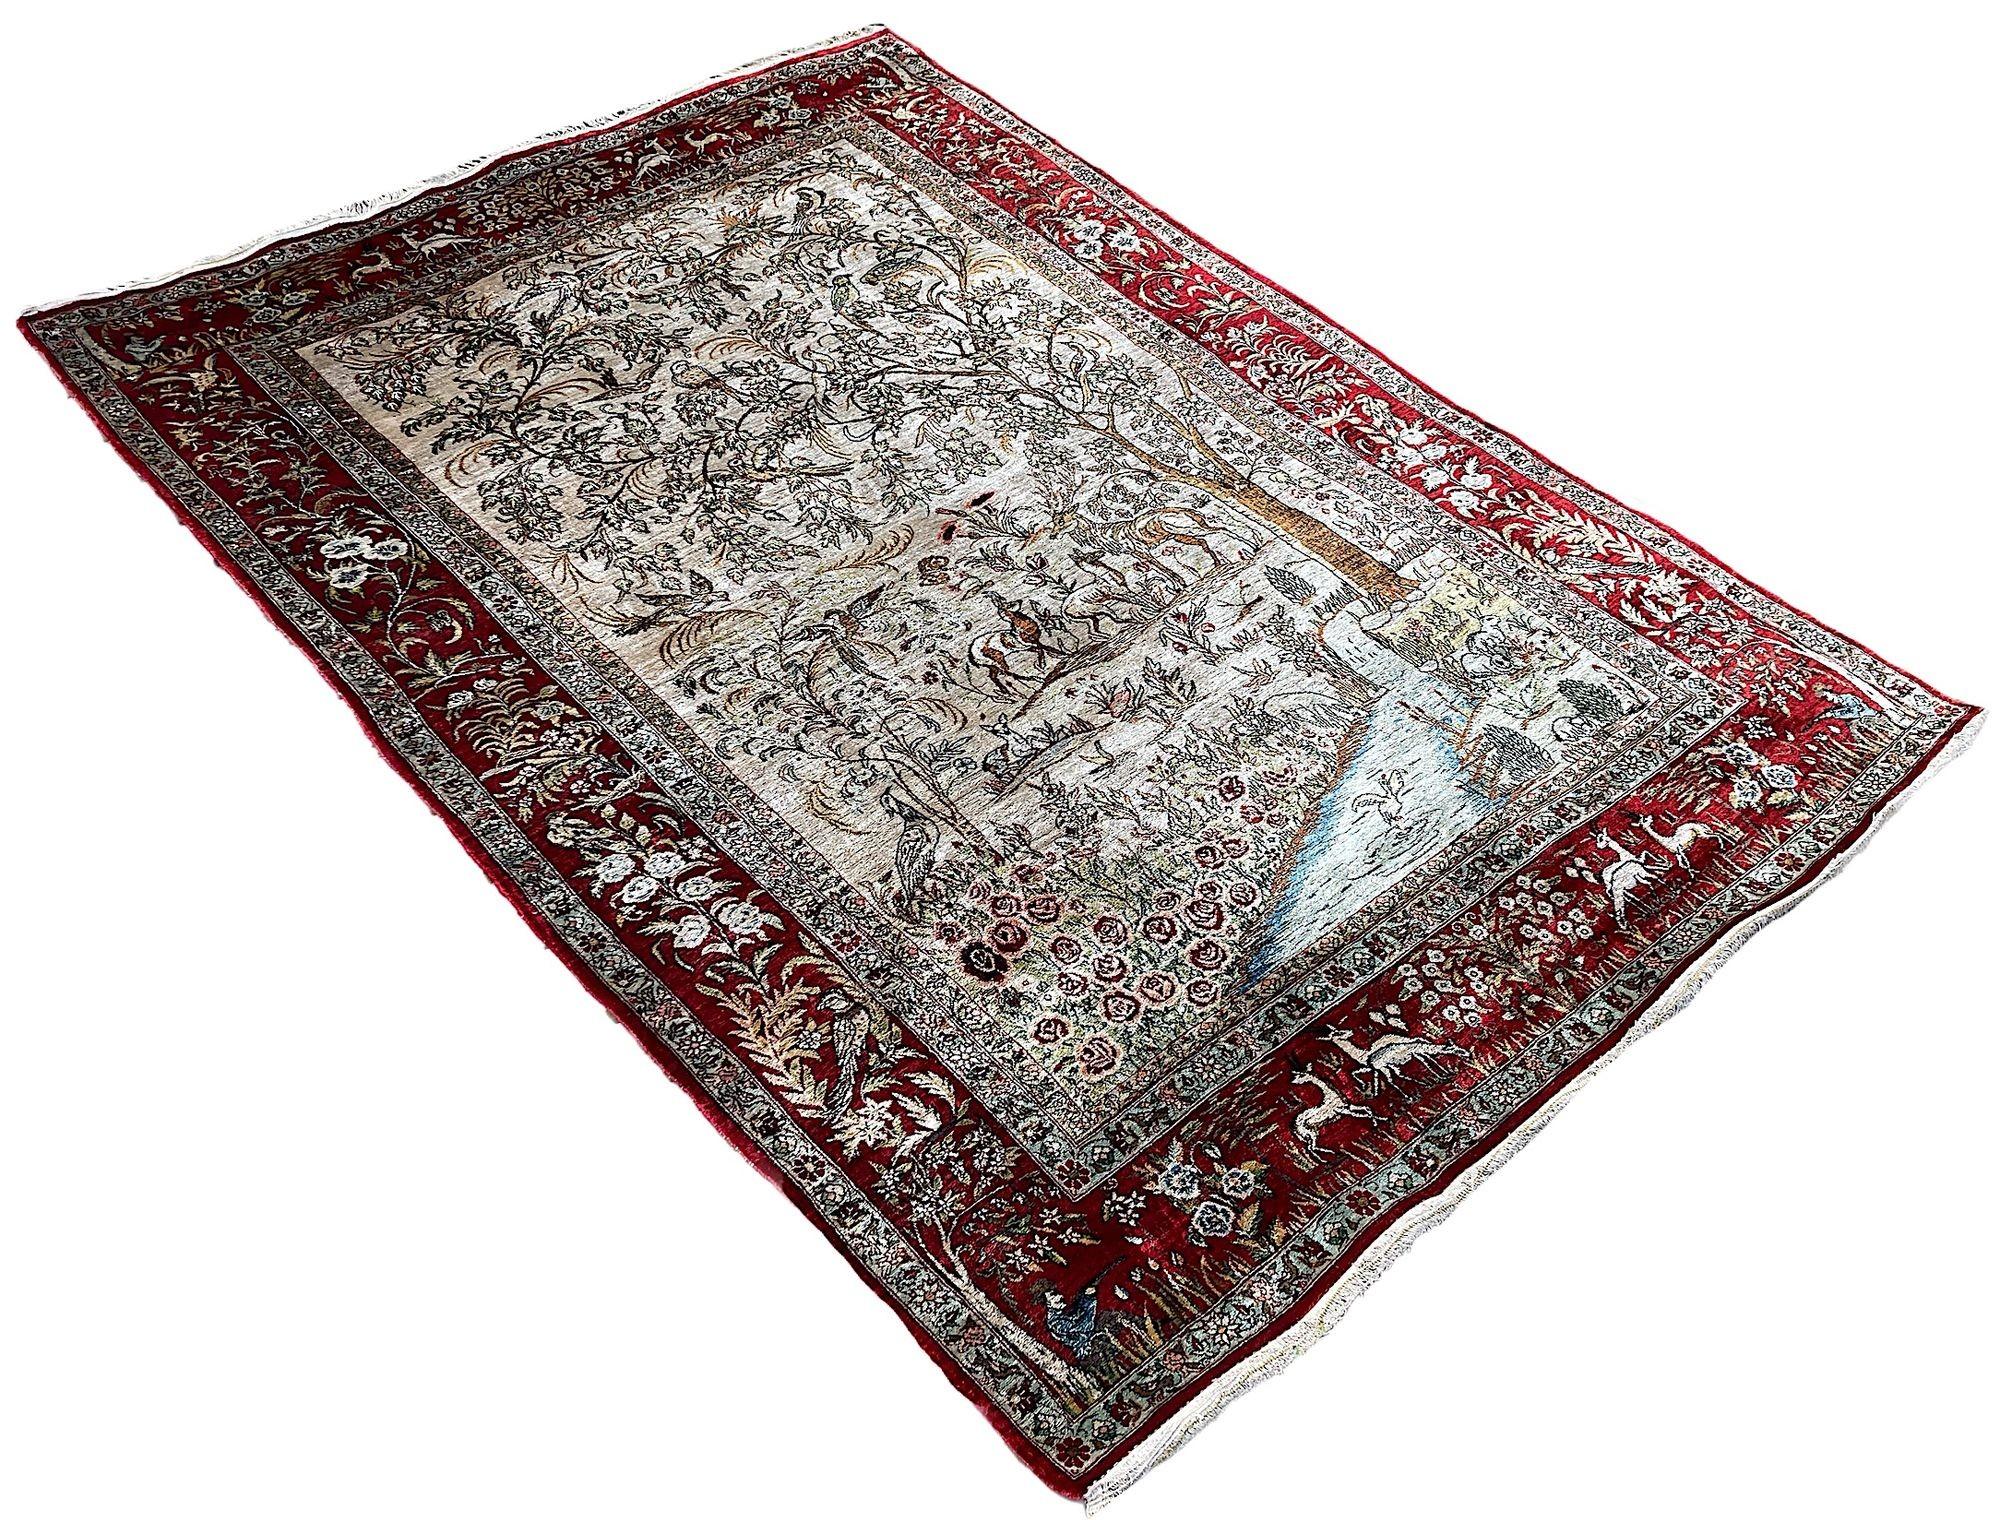 Vintage Silk Qum Rug 2.03m x 1.44m In Good Condition For Sale In St. Albans, GB